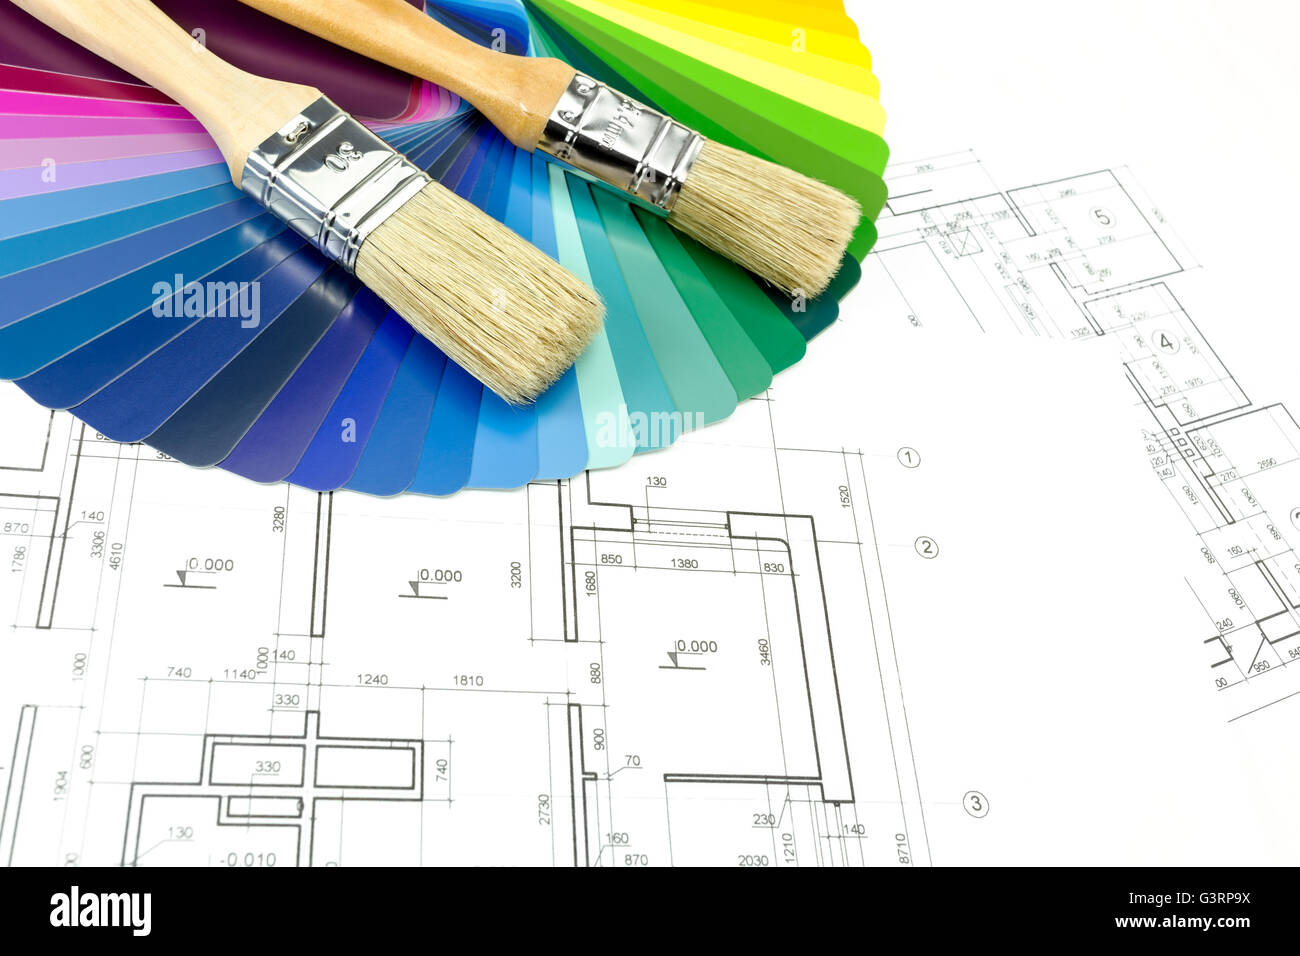 Paintbrushes and colorful paint samples on house plan blueprint background Stock Photo